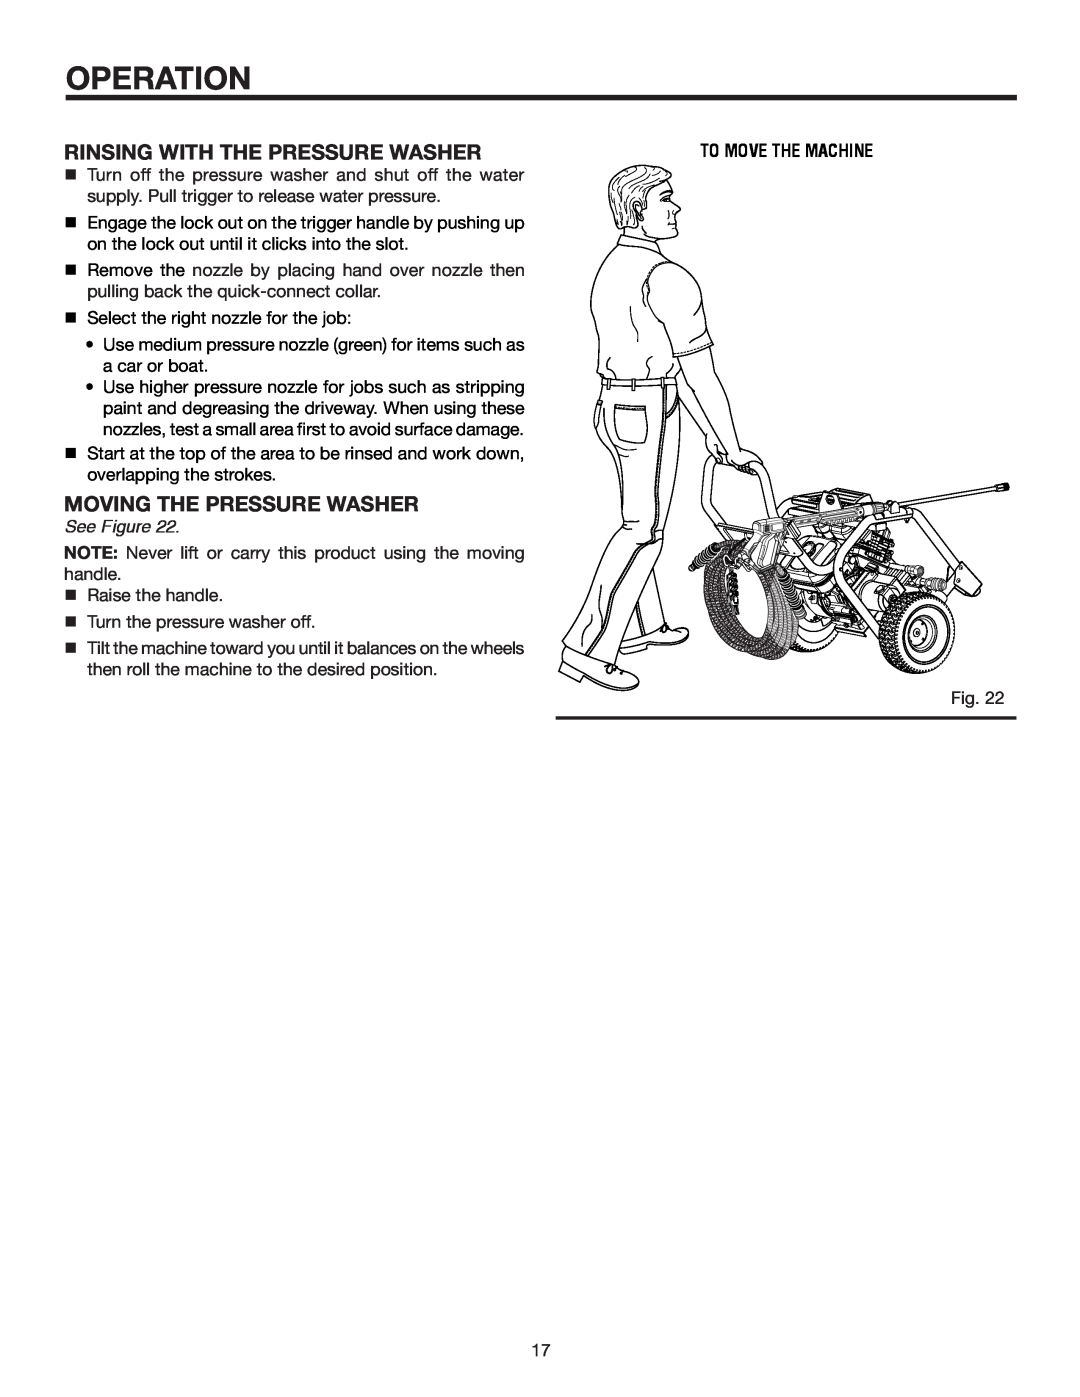 RIDGID RD80763 rinsing with the pressure washer, MOVING the pressure washer, Operation, See Figure, to move the machine 